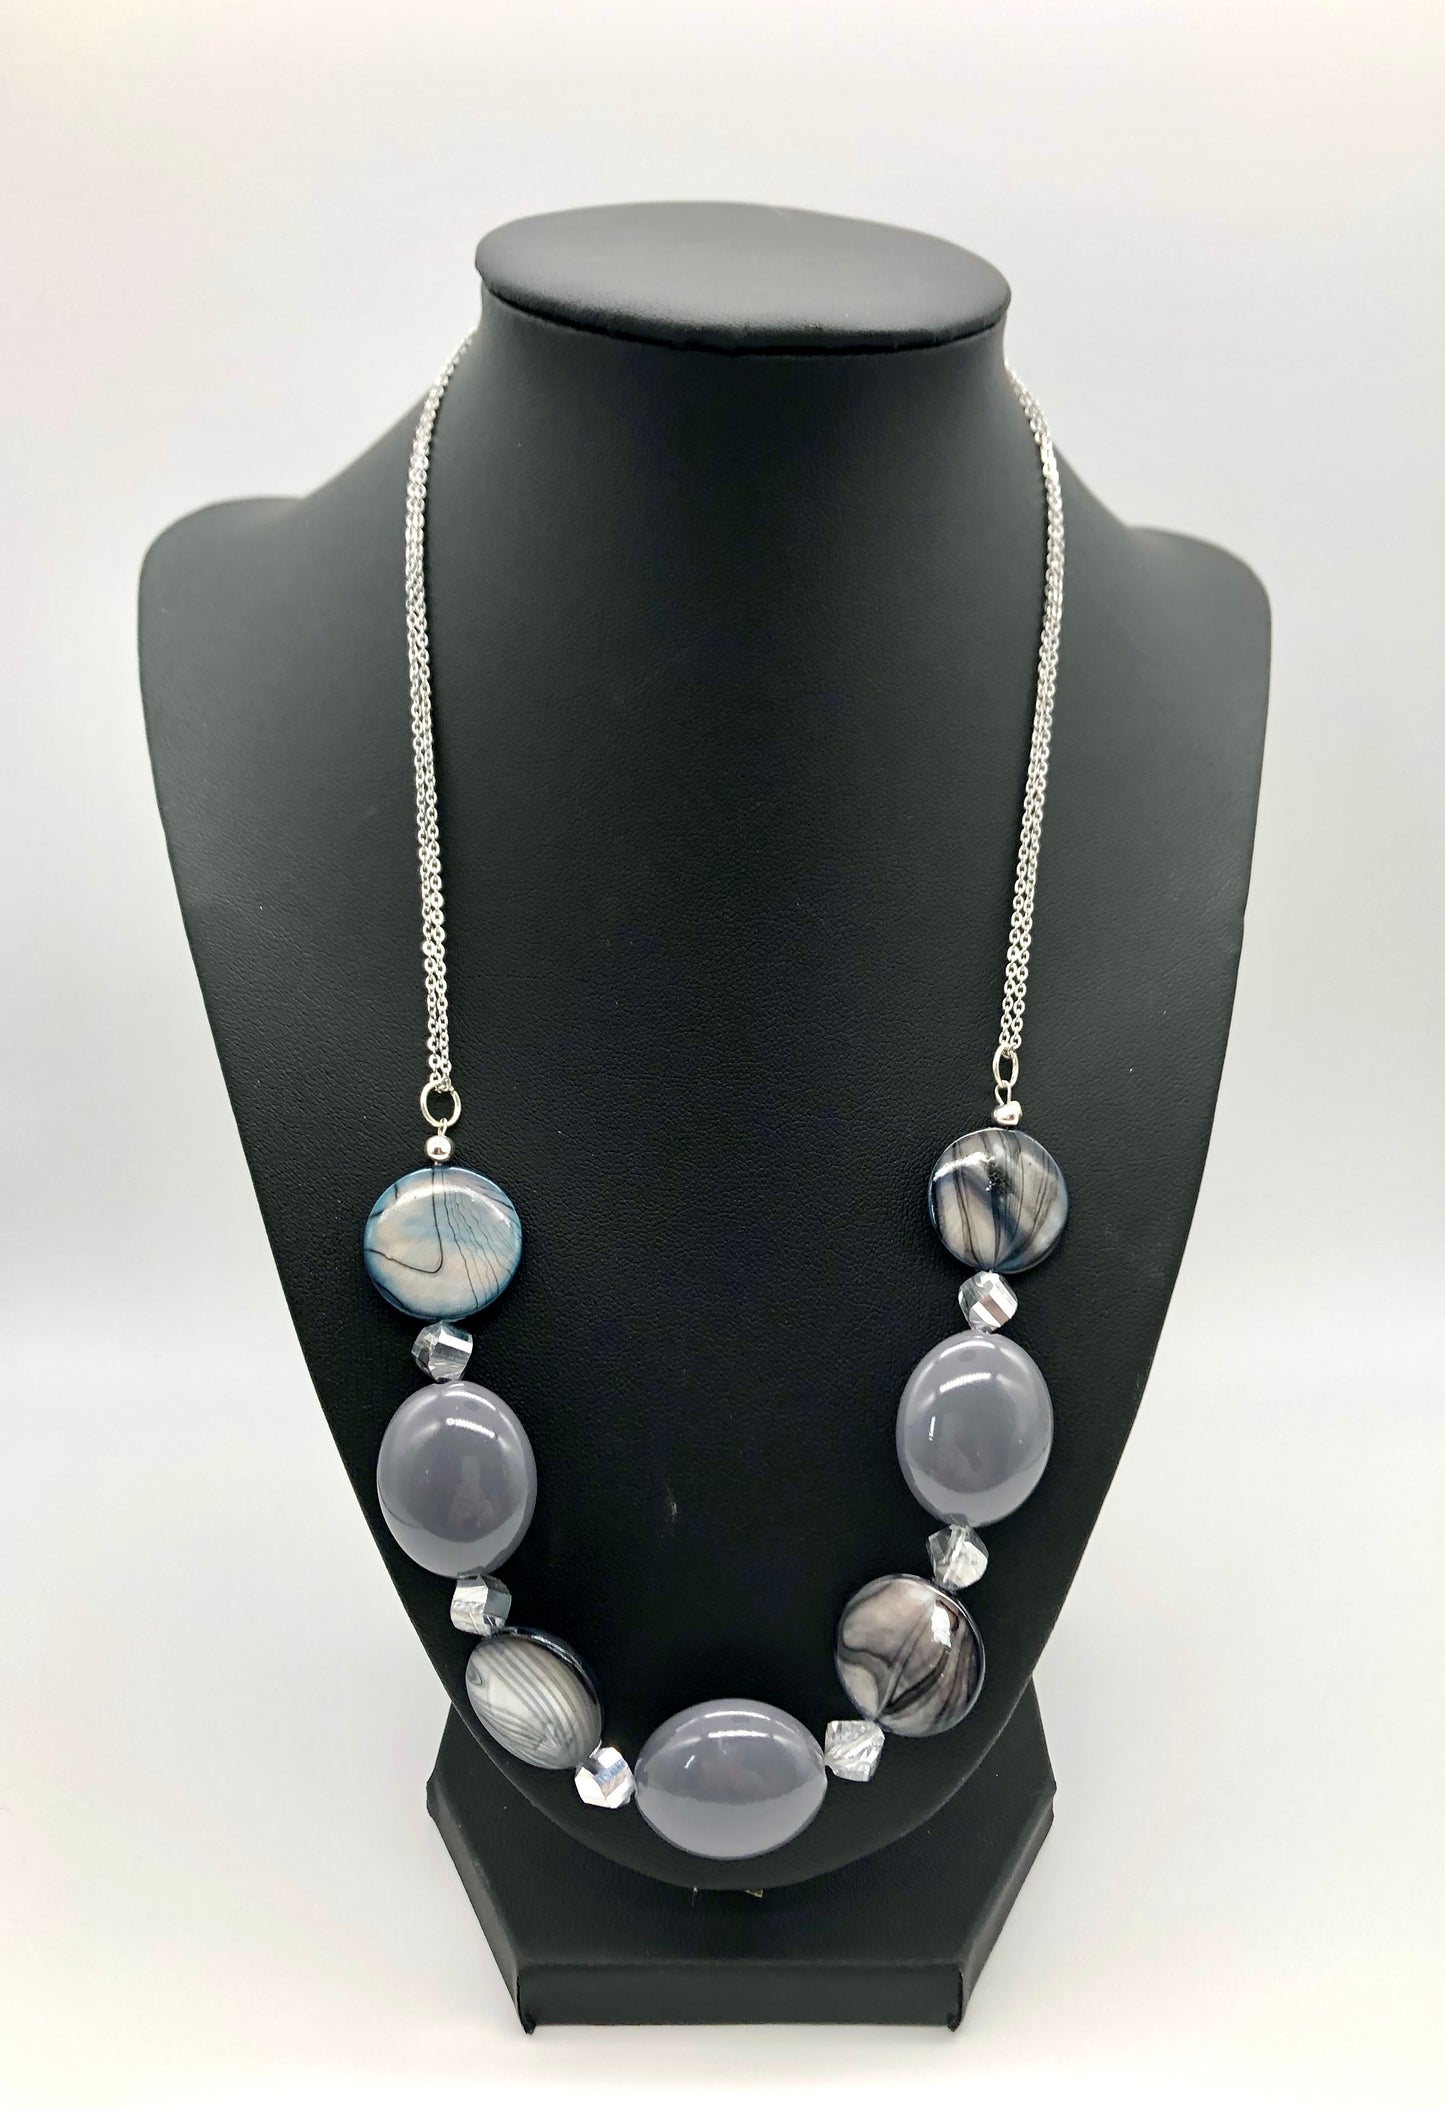 Grey bead and blue-grey shell silver chain necklace